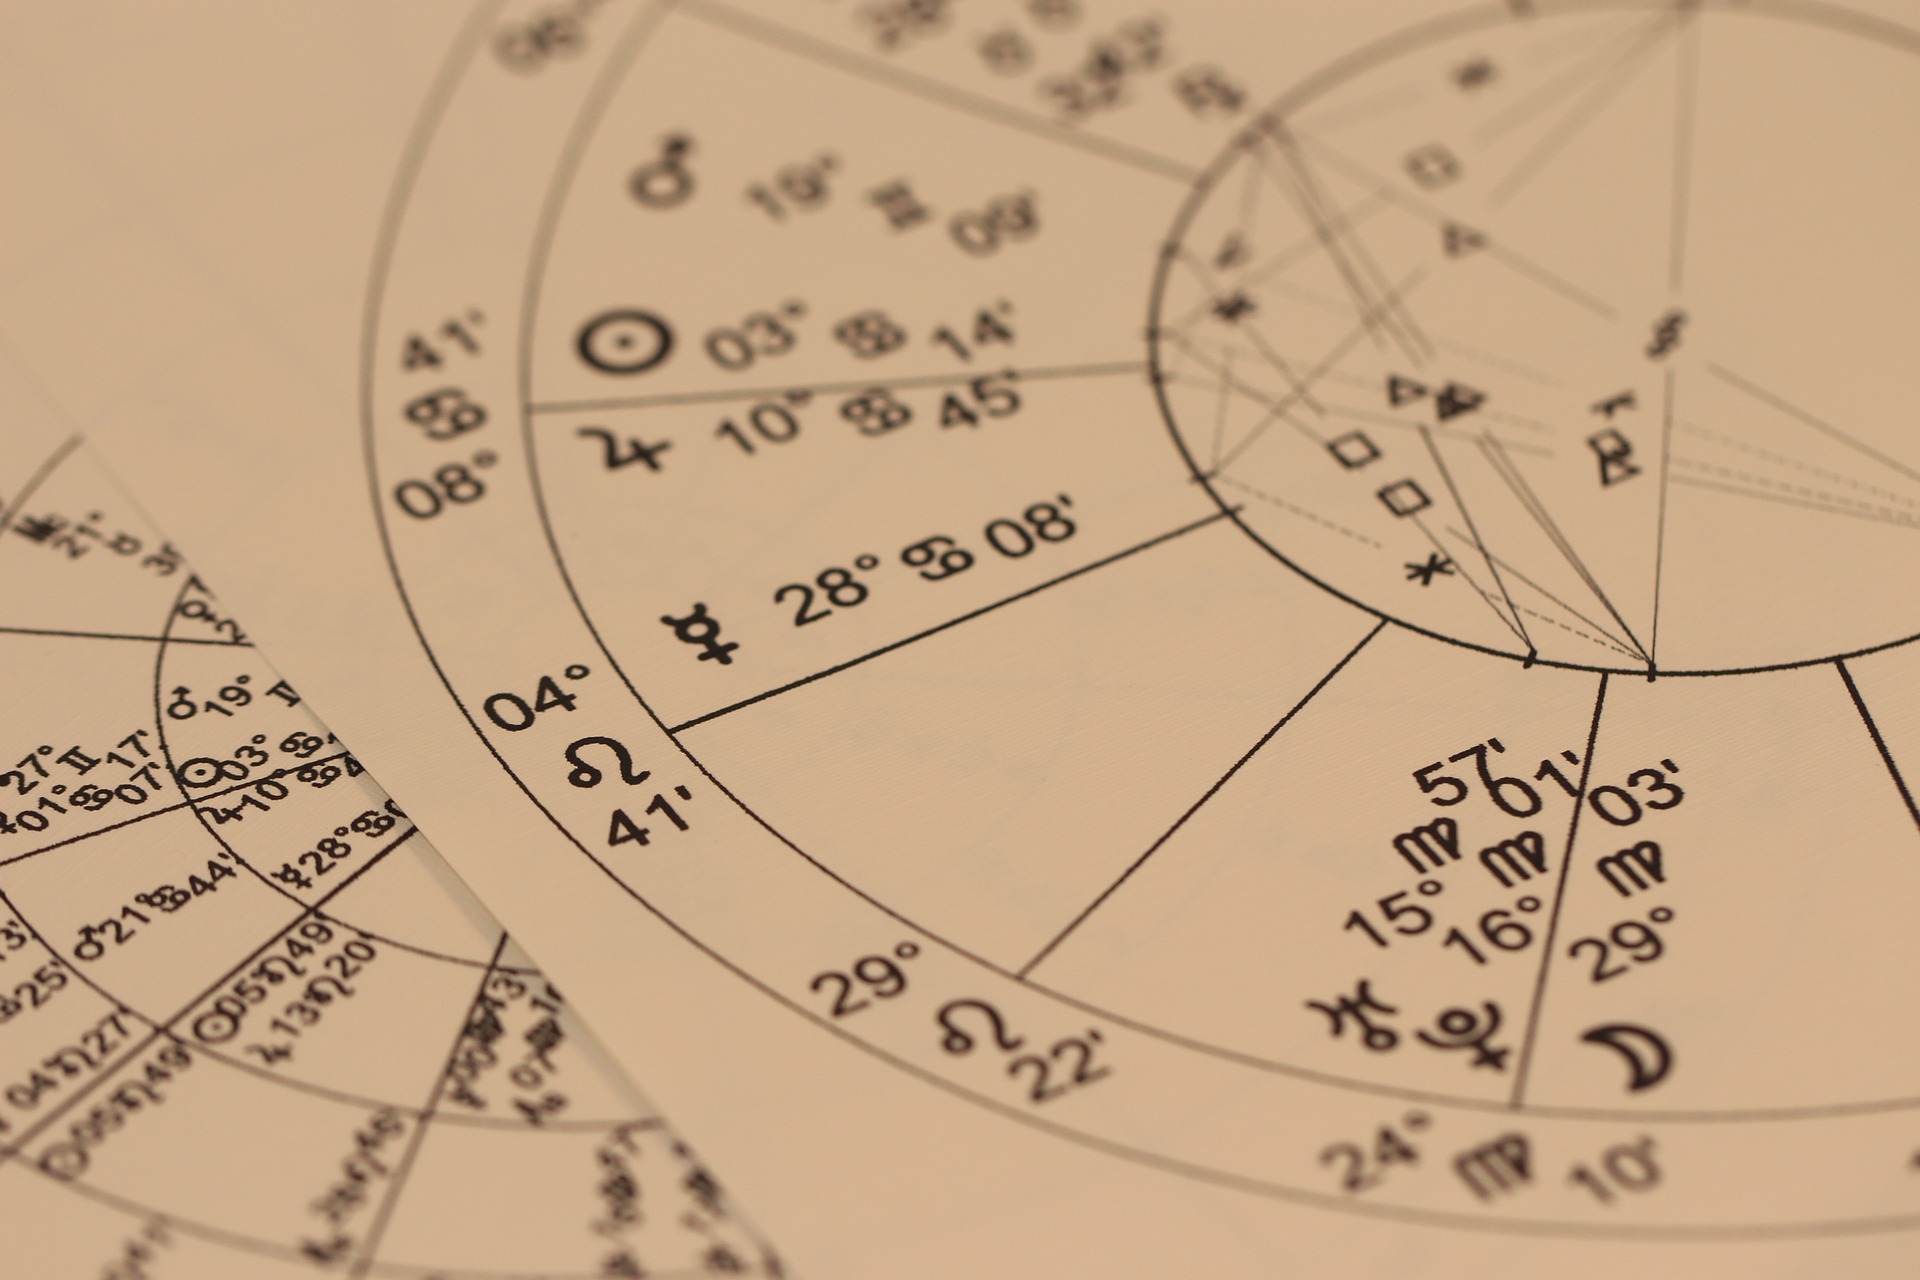 Astrology divination chart with different symbols